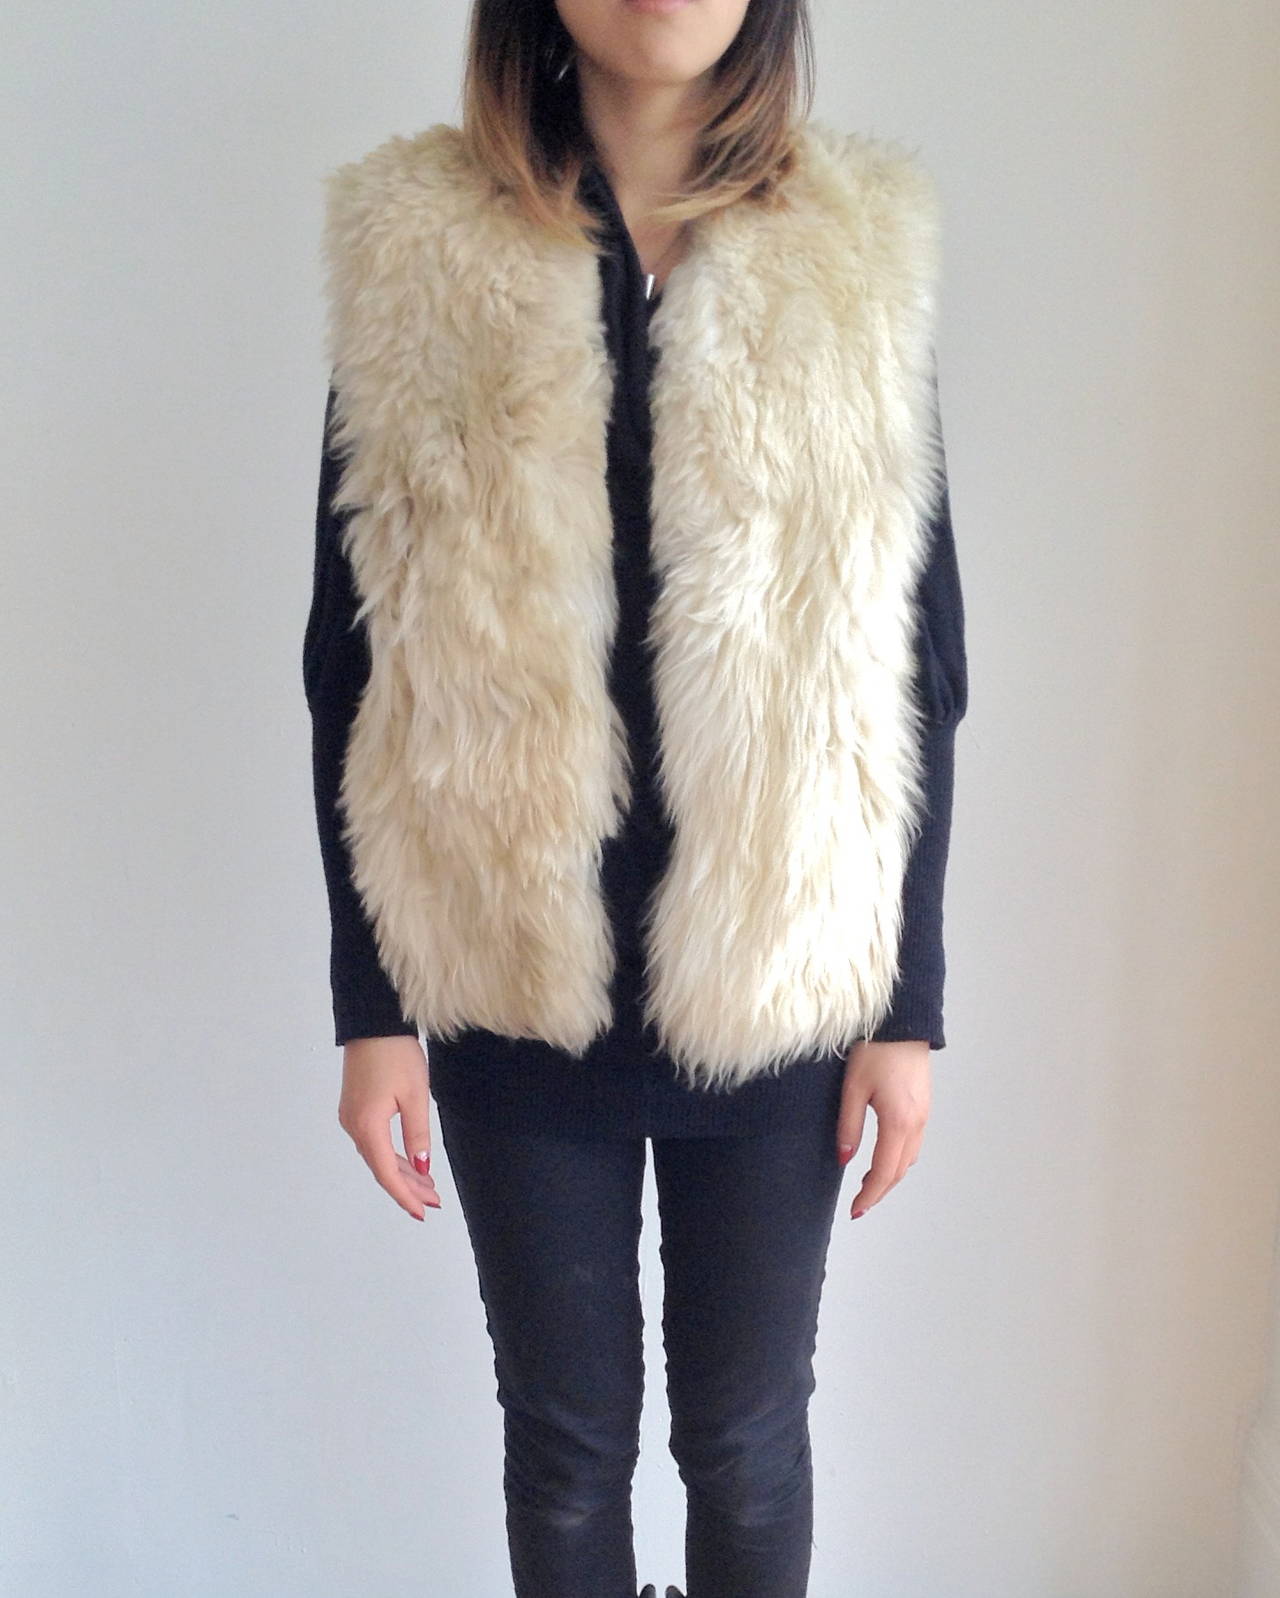 Vintage White Tibetan Lambskin Fur Vest. Pre-owned. Dry-cleaned. Fits like a small or extra small. 

Width: 34''
Length: 24''
Inseam armpit to bottom: 12
 

Location Toronto